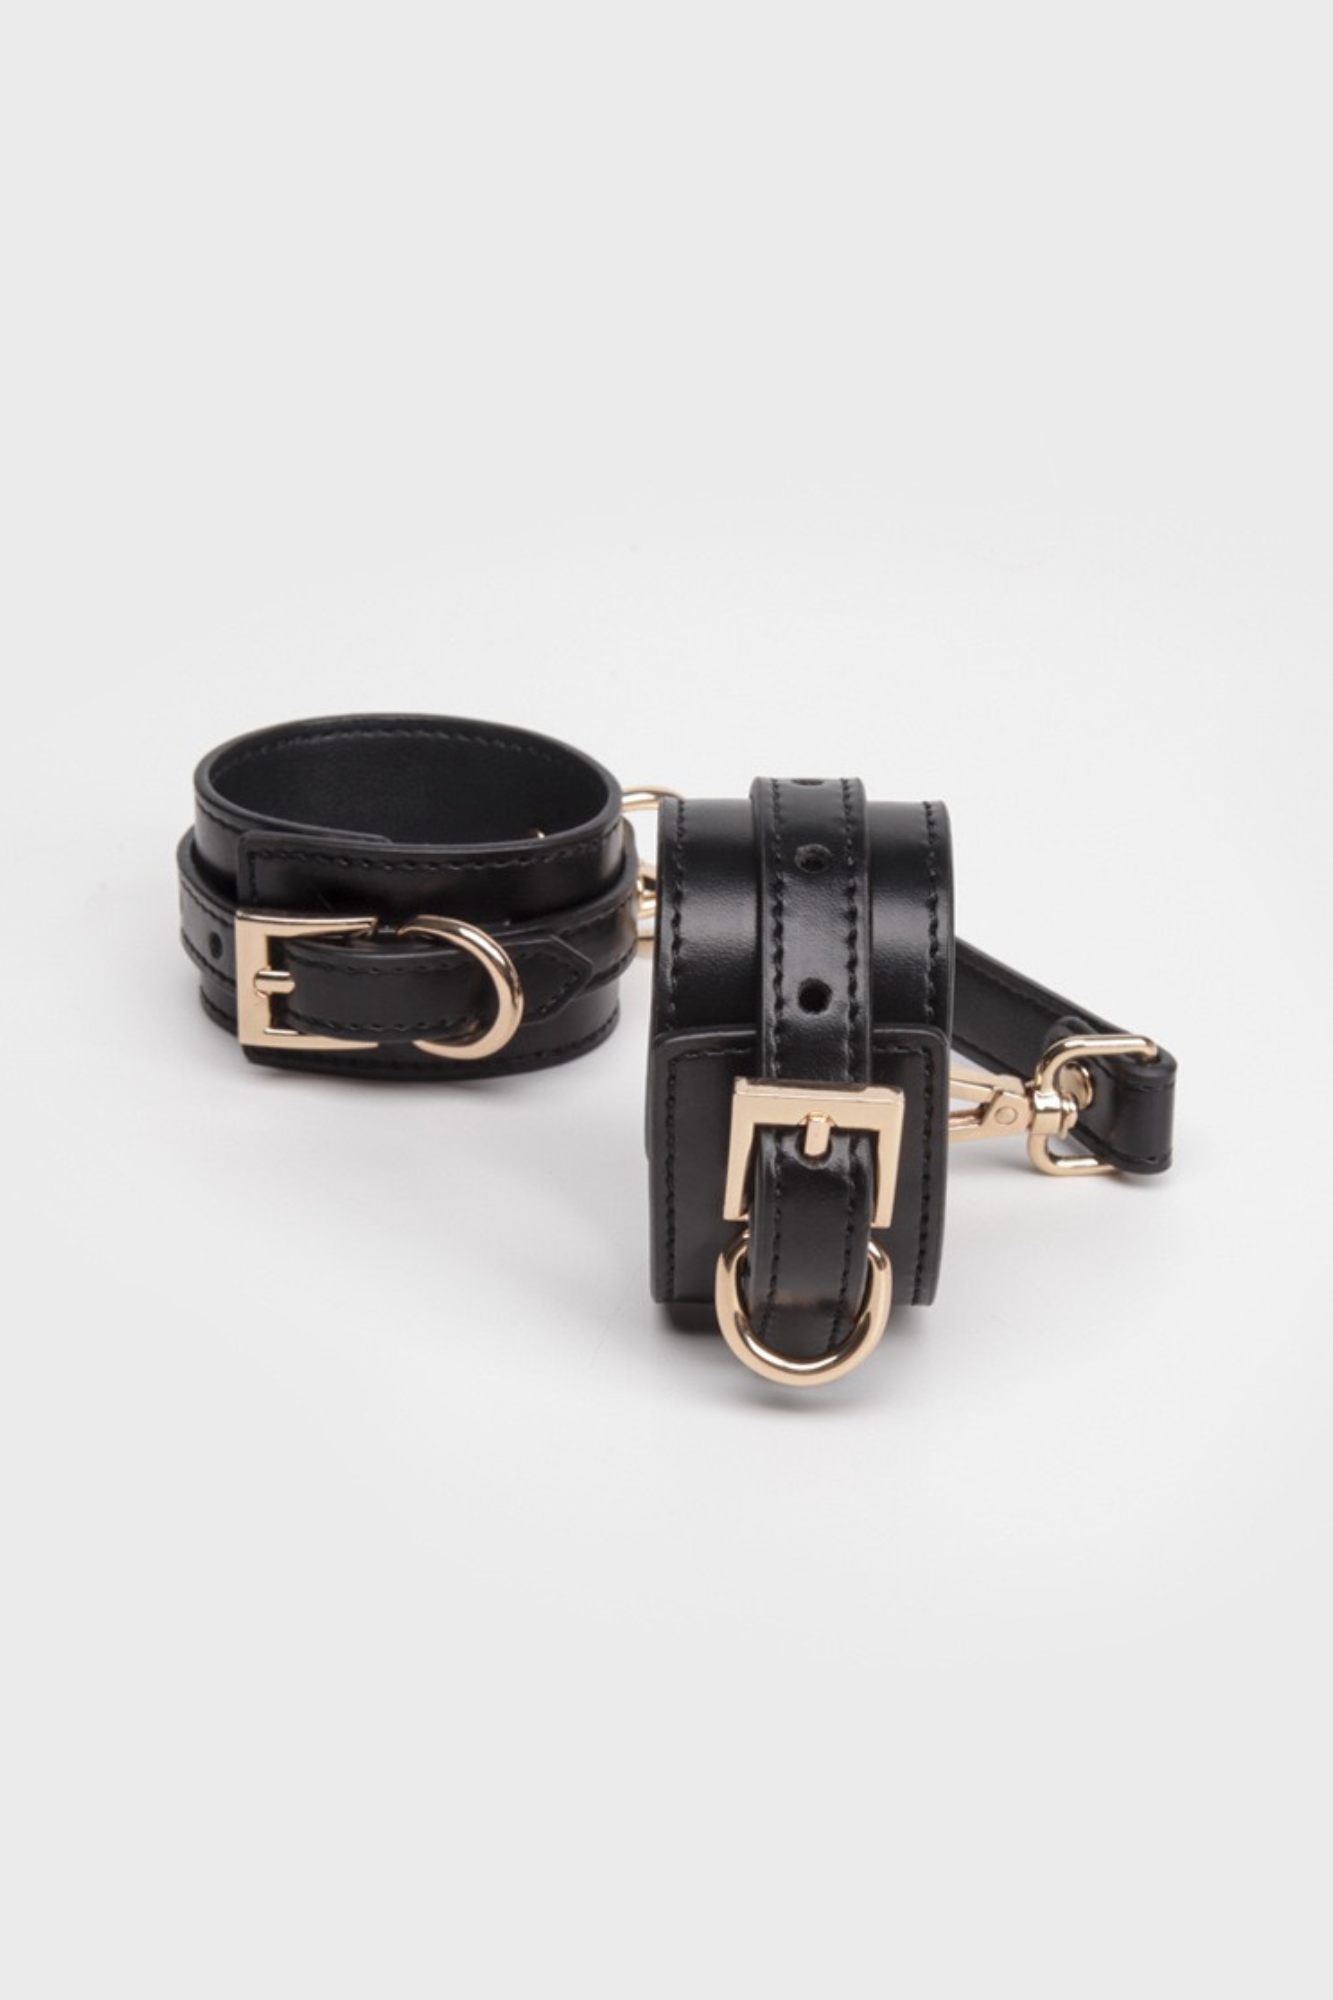 Vegan Black Leather Bondage Cuffs (also available in Pink!)